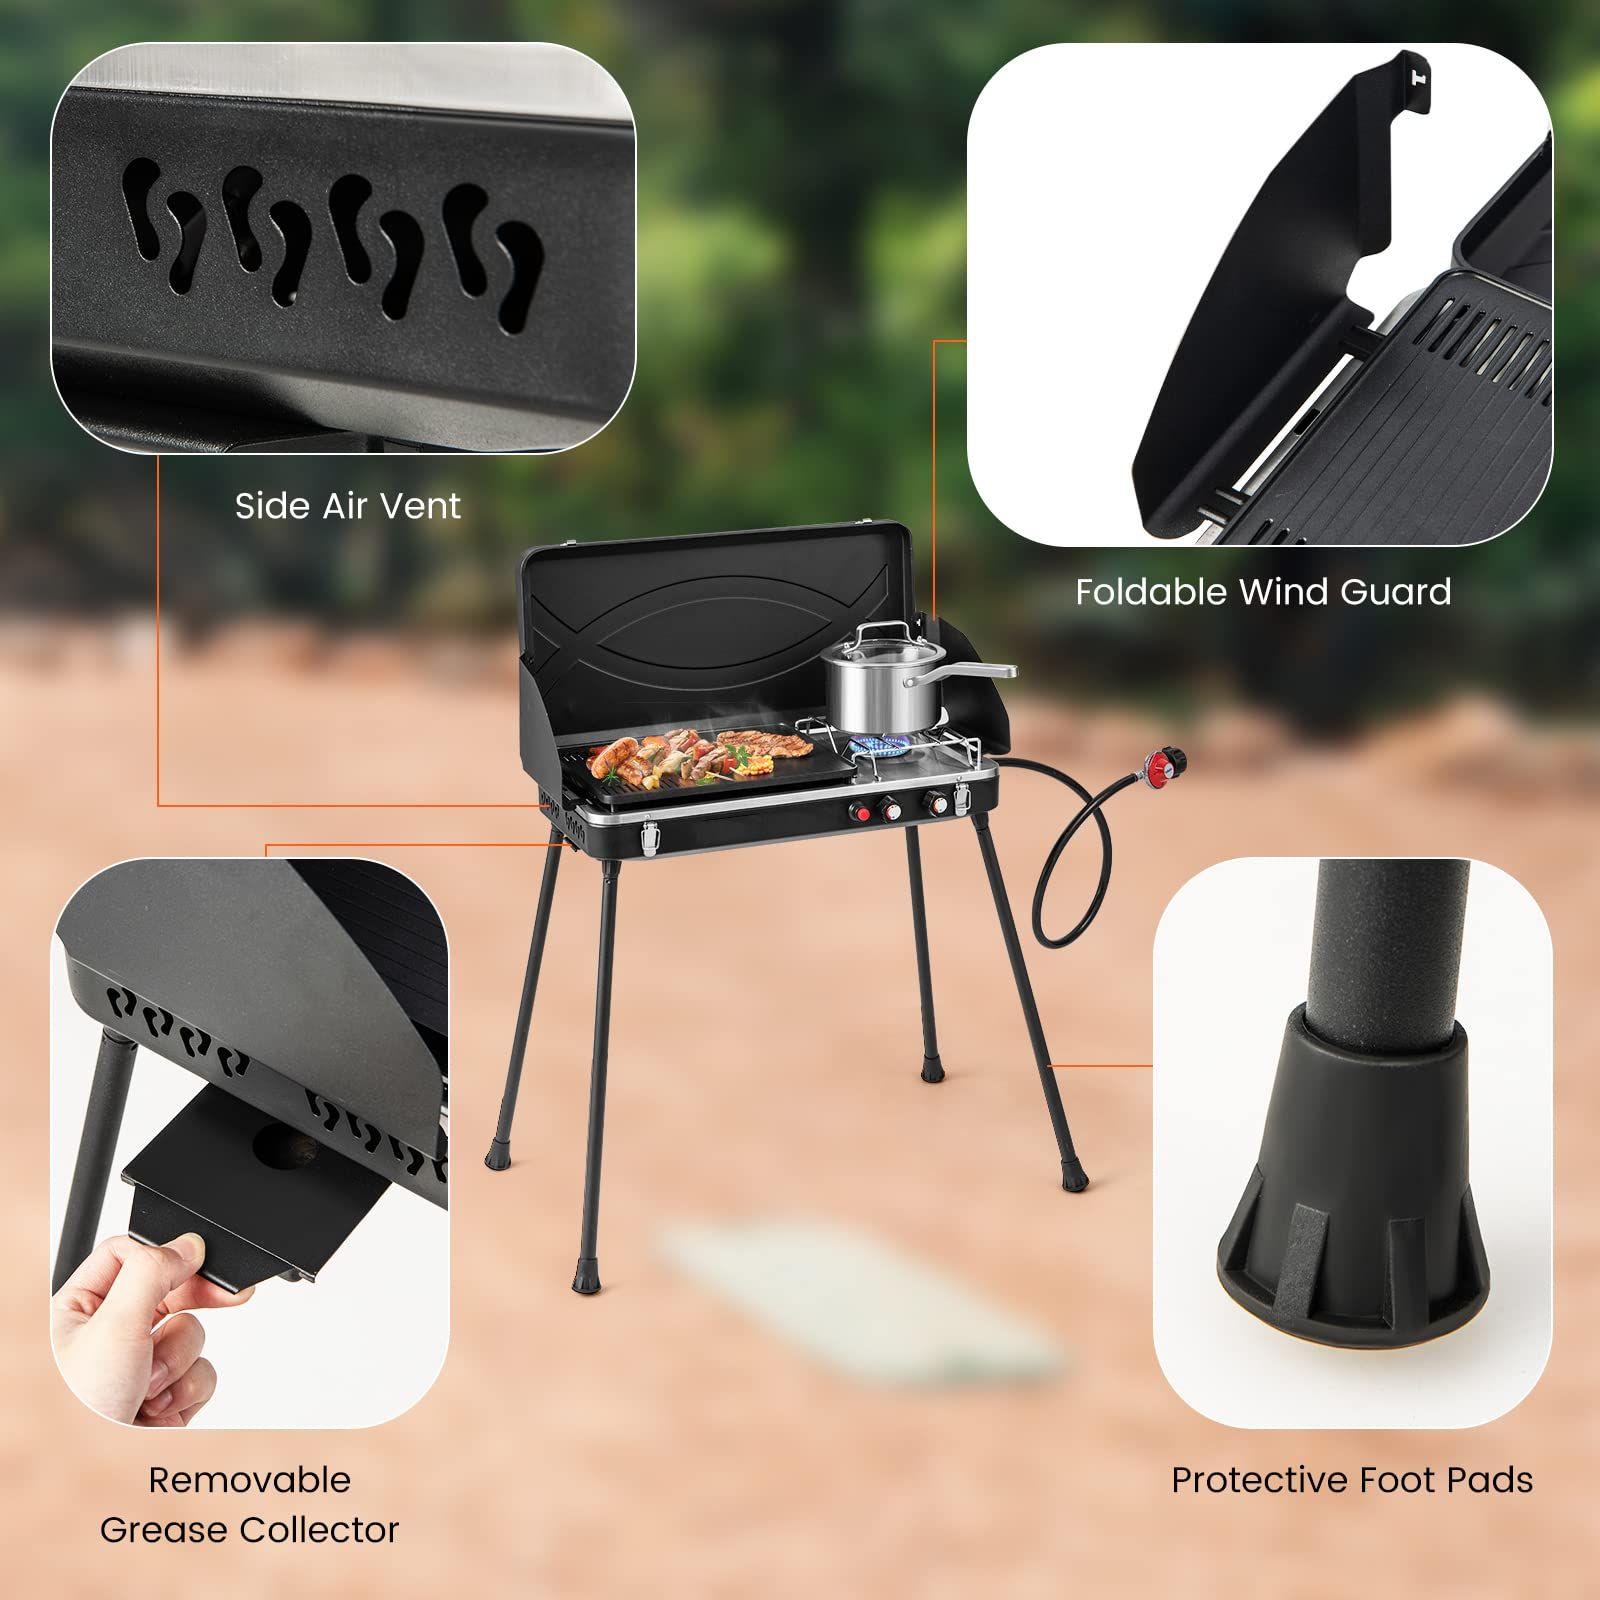 Giantex 2-in-1 Gas Camping Grill and Stove